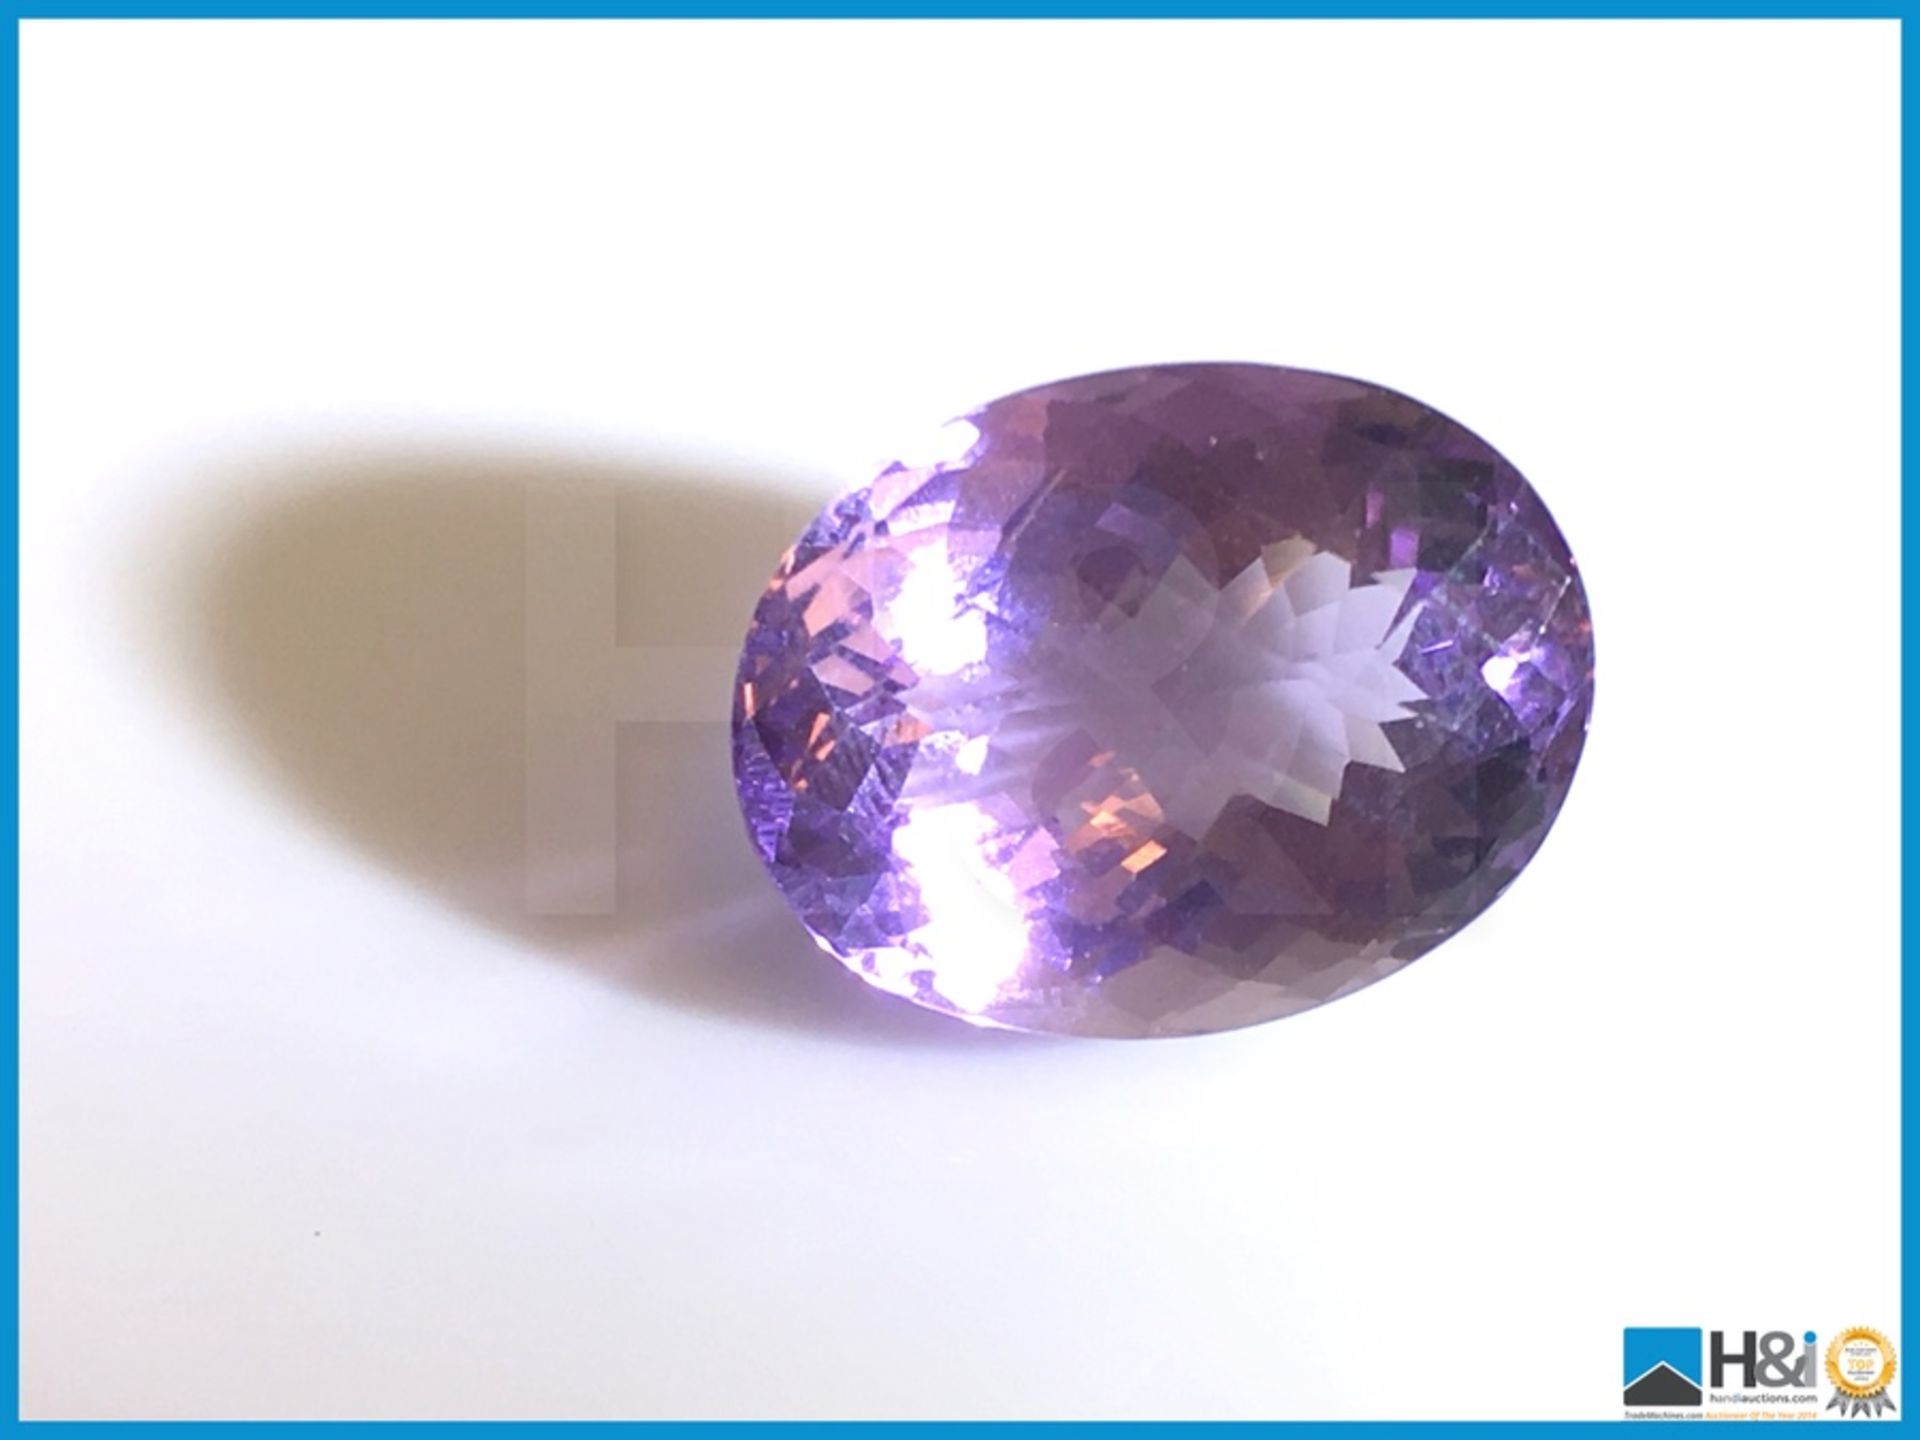 16ct Natural Amethyst. Oval Cut in Purple. Transparent 18.14x13.83x11.05mm. Certification: None